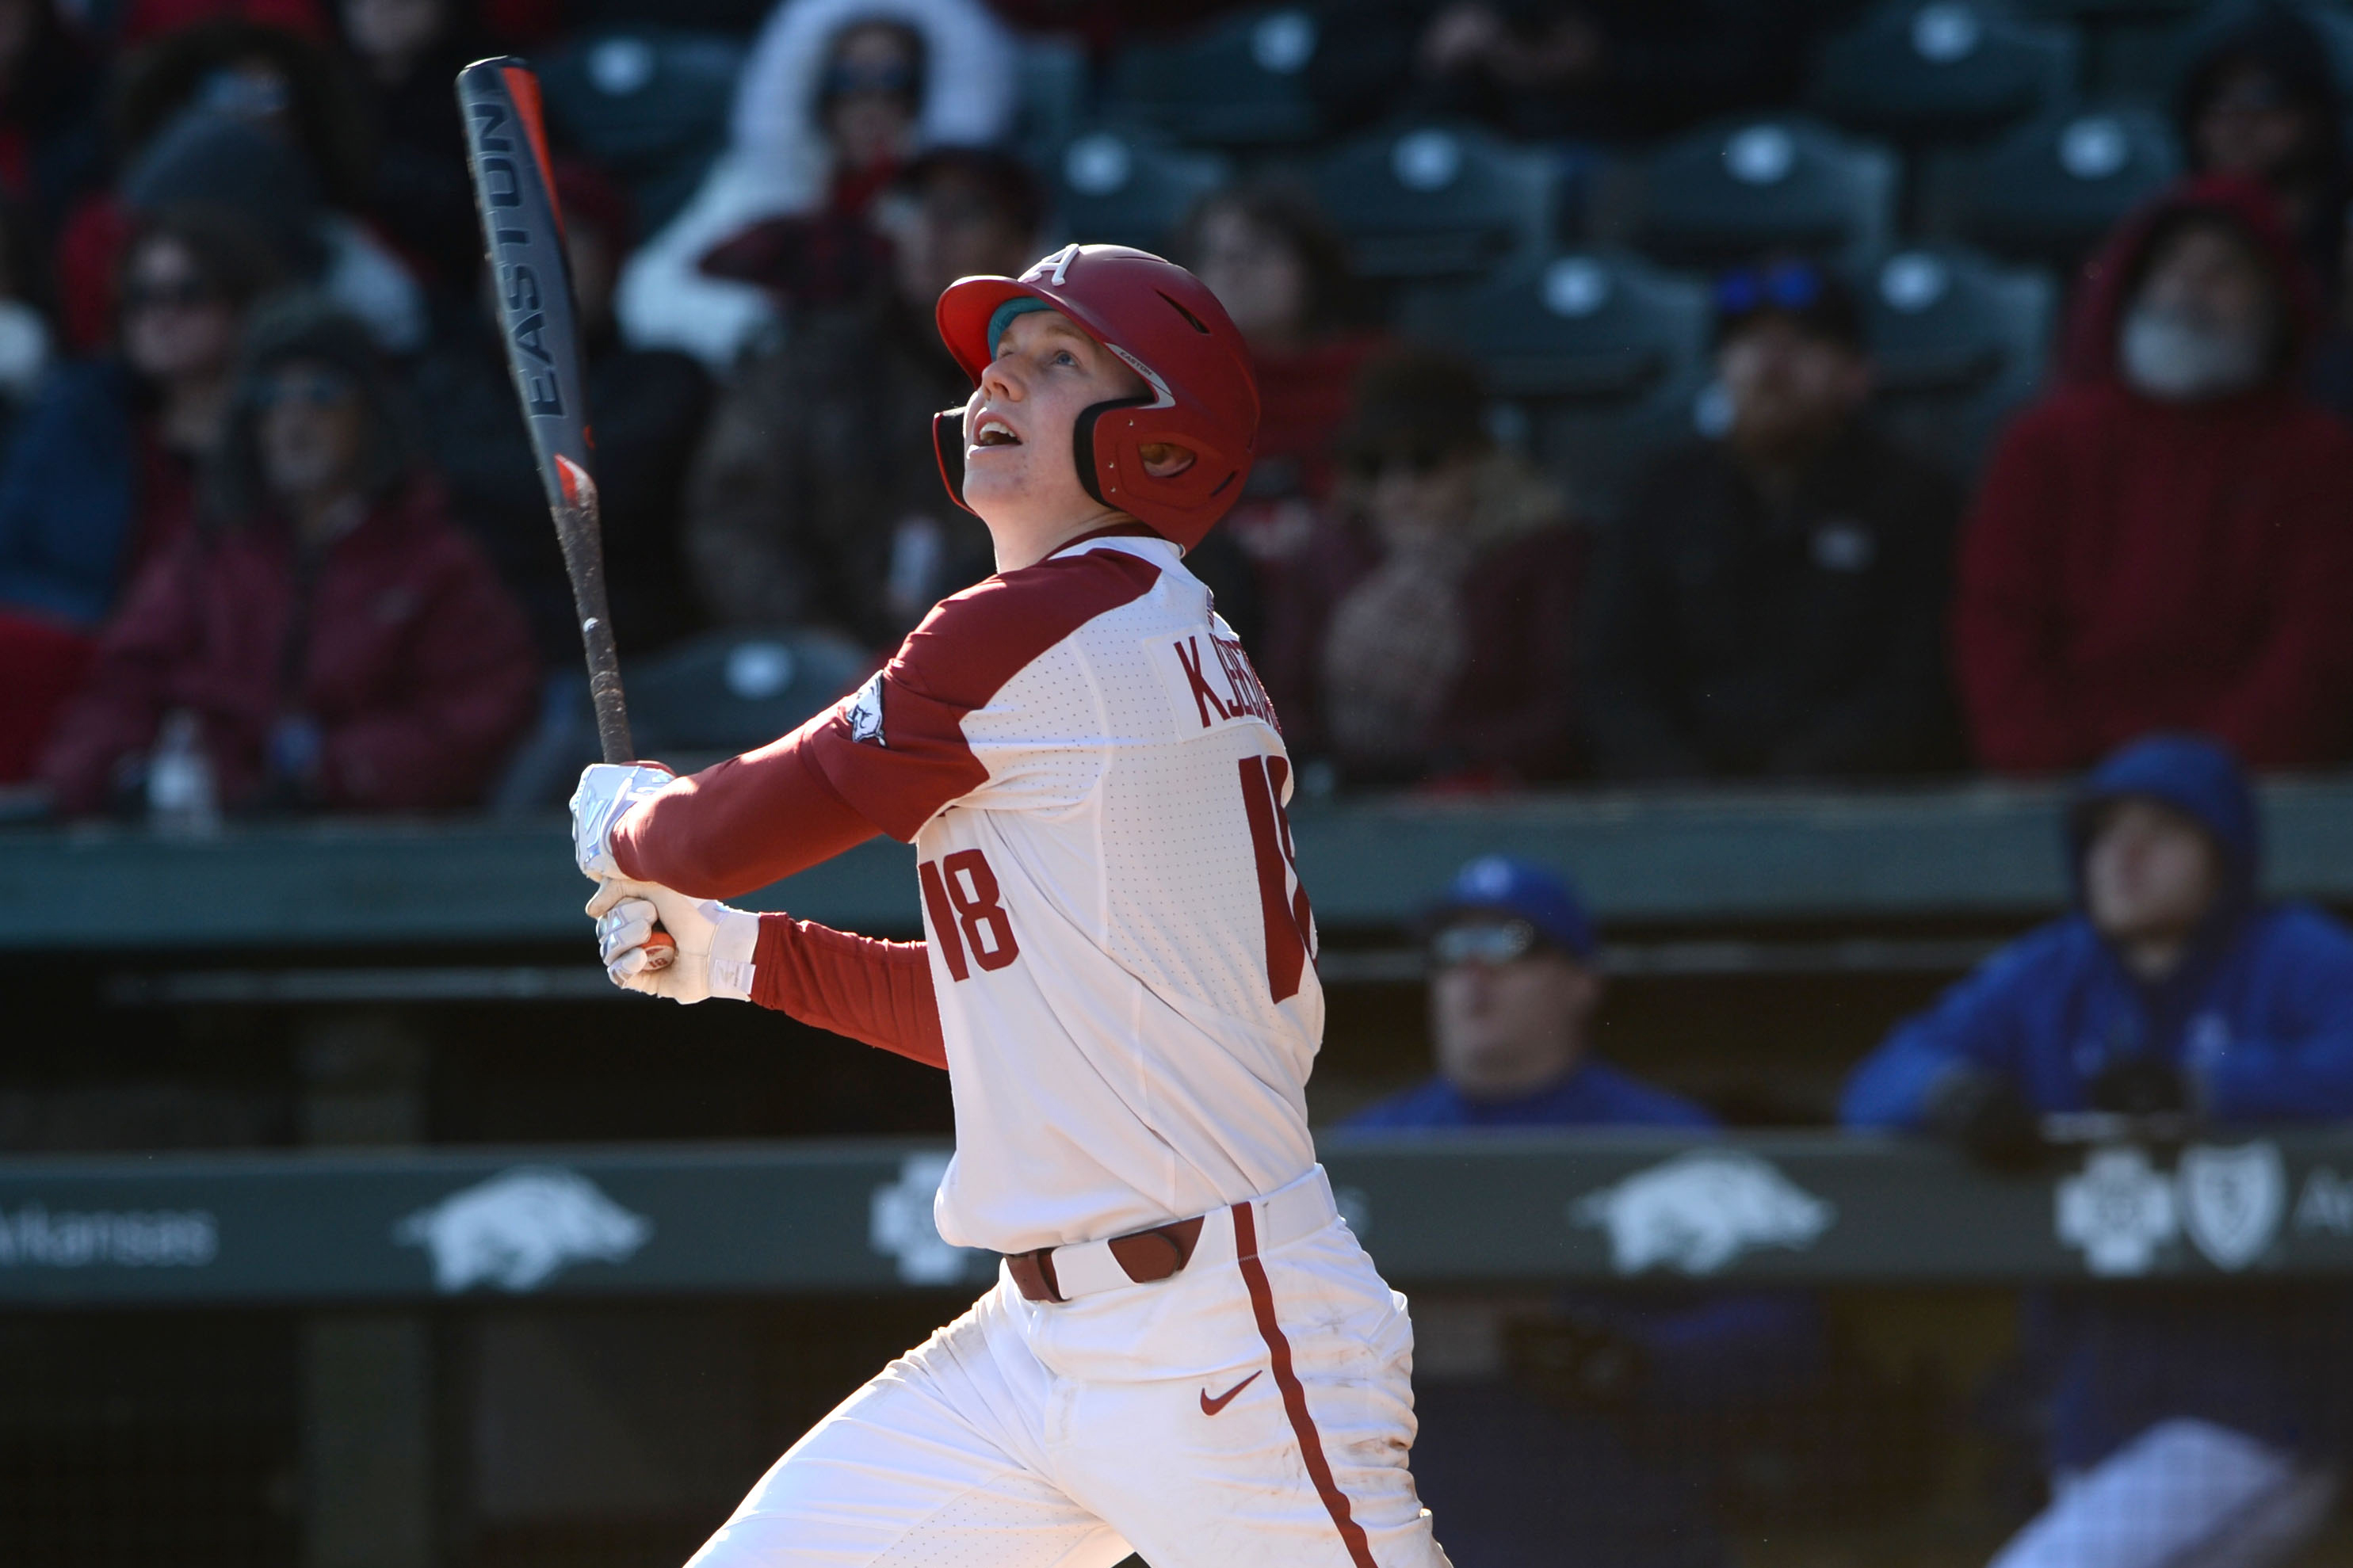 WholeHogSports - For the birds: Orioles take Kjerstad with No. 2 pick